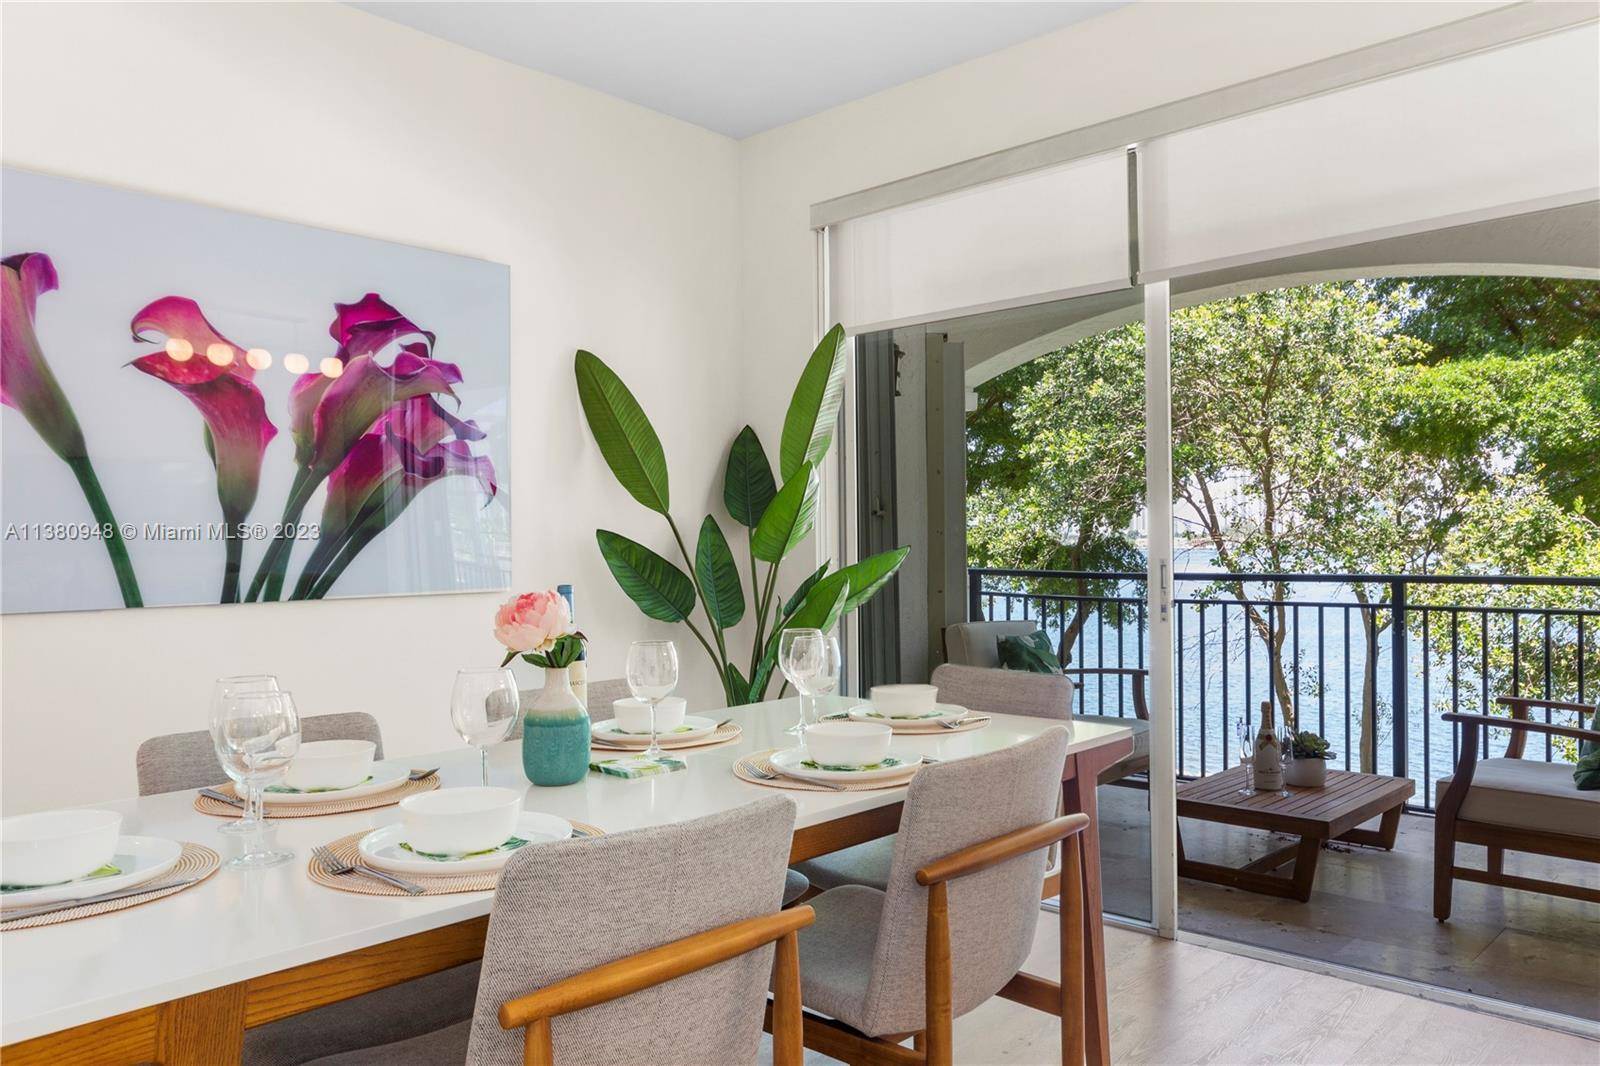 Beautiful and peaceful, fully furnished designer finished condo directly facing the bay, features 3 bedrooms and 2 bathrooms, custom finishes, smart appliances and large closets.